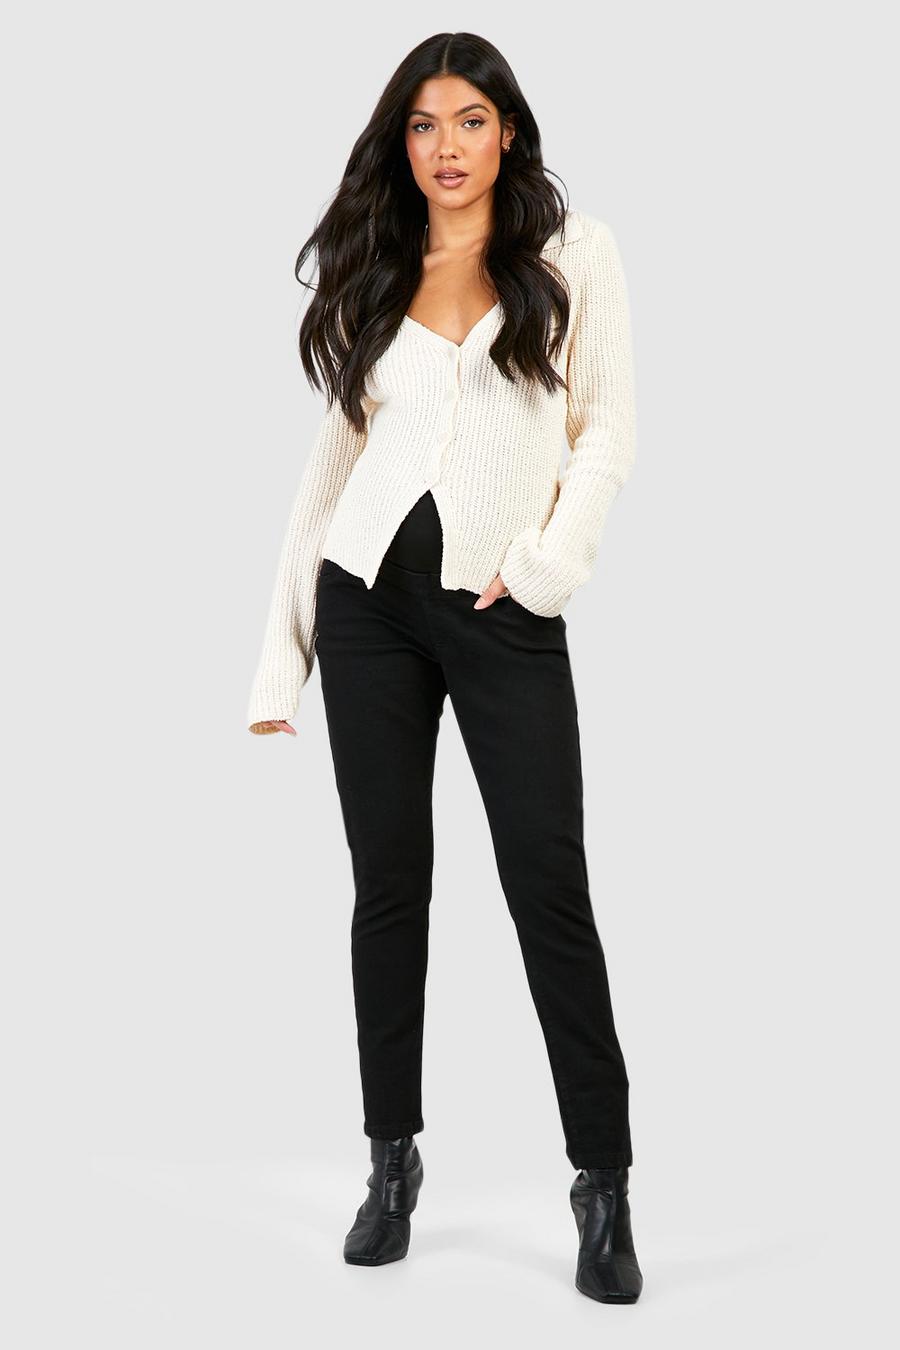 Blooming Marvellous black skinny fit jeans - Maternity wear - Pregnancy